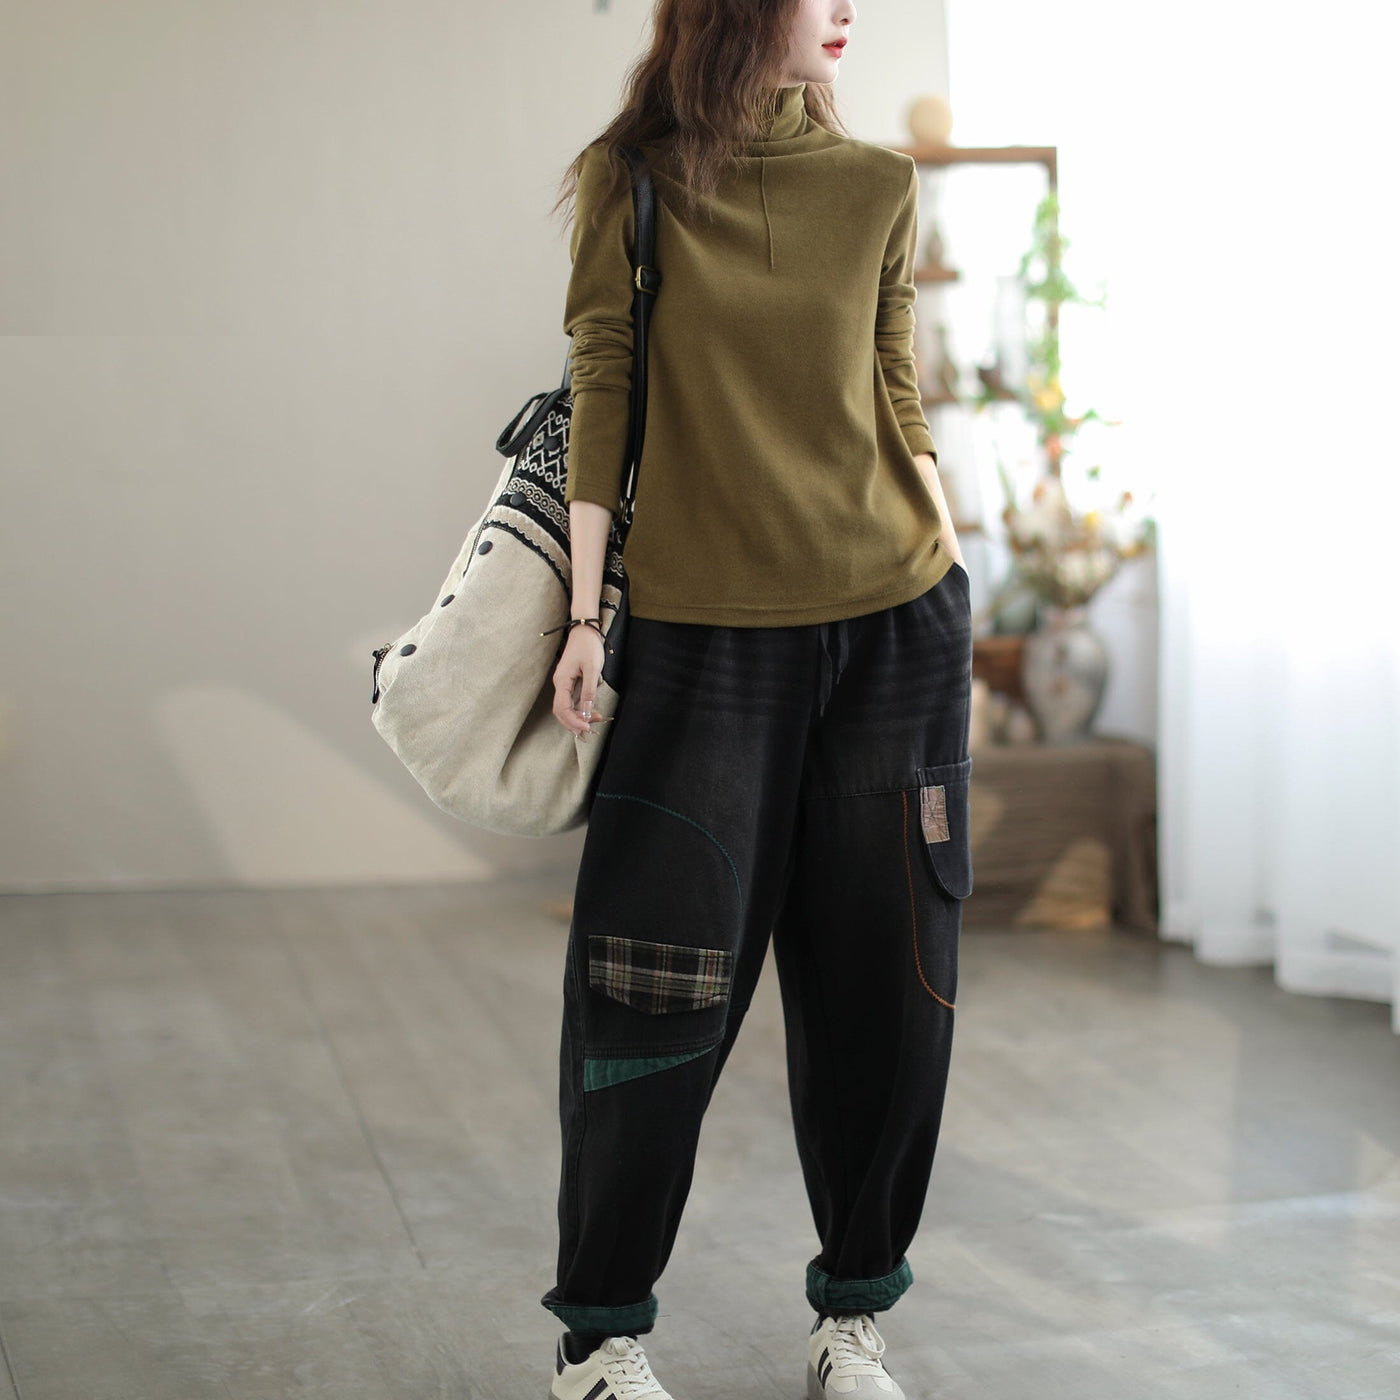 Winter Furred Loose Patchwork Cotton Jeans